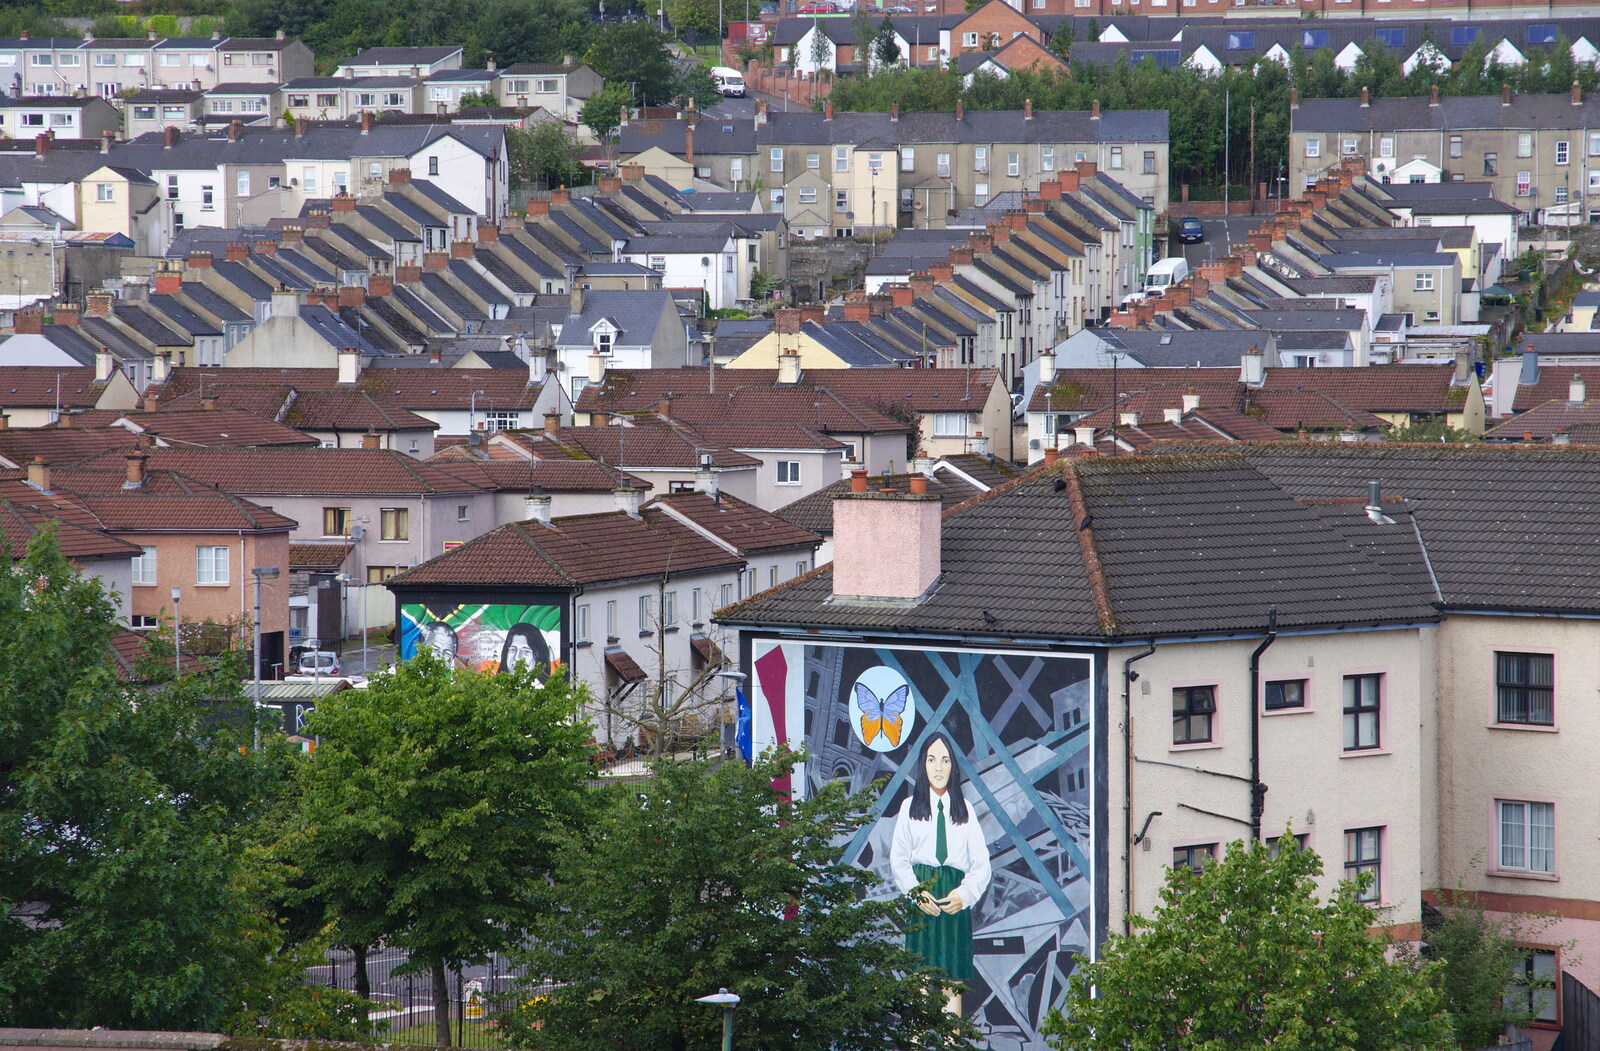 The Bogside Estate, and a Catholic schoolgirl mural from A Day in Derry, County Londonderry, Northern Ireland - 15th August 2019